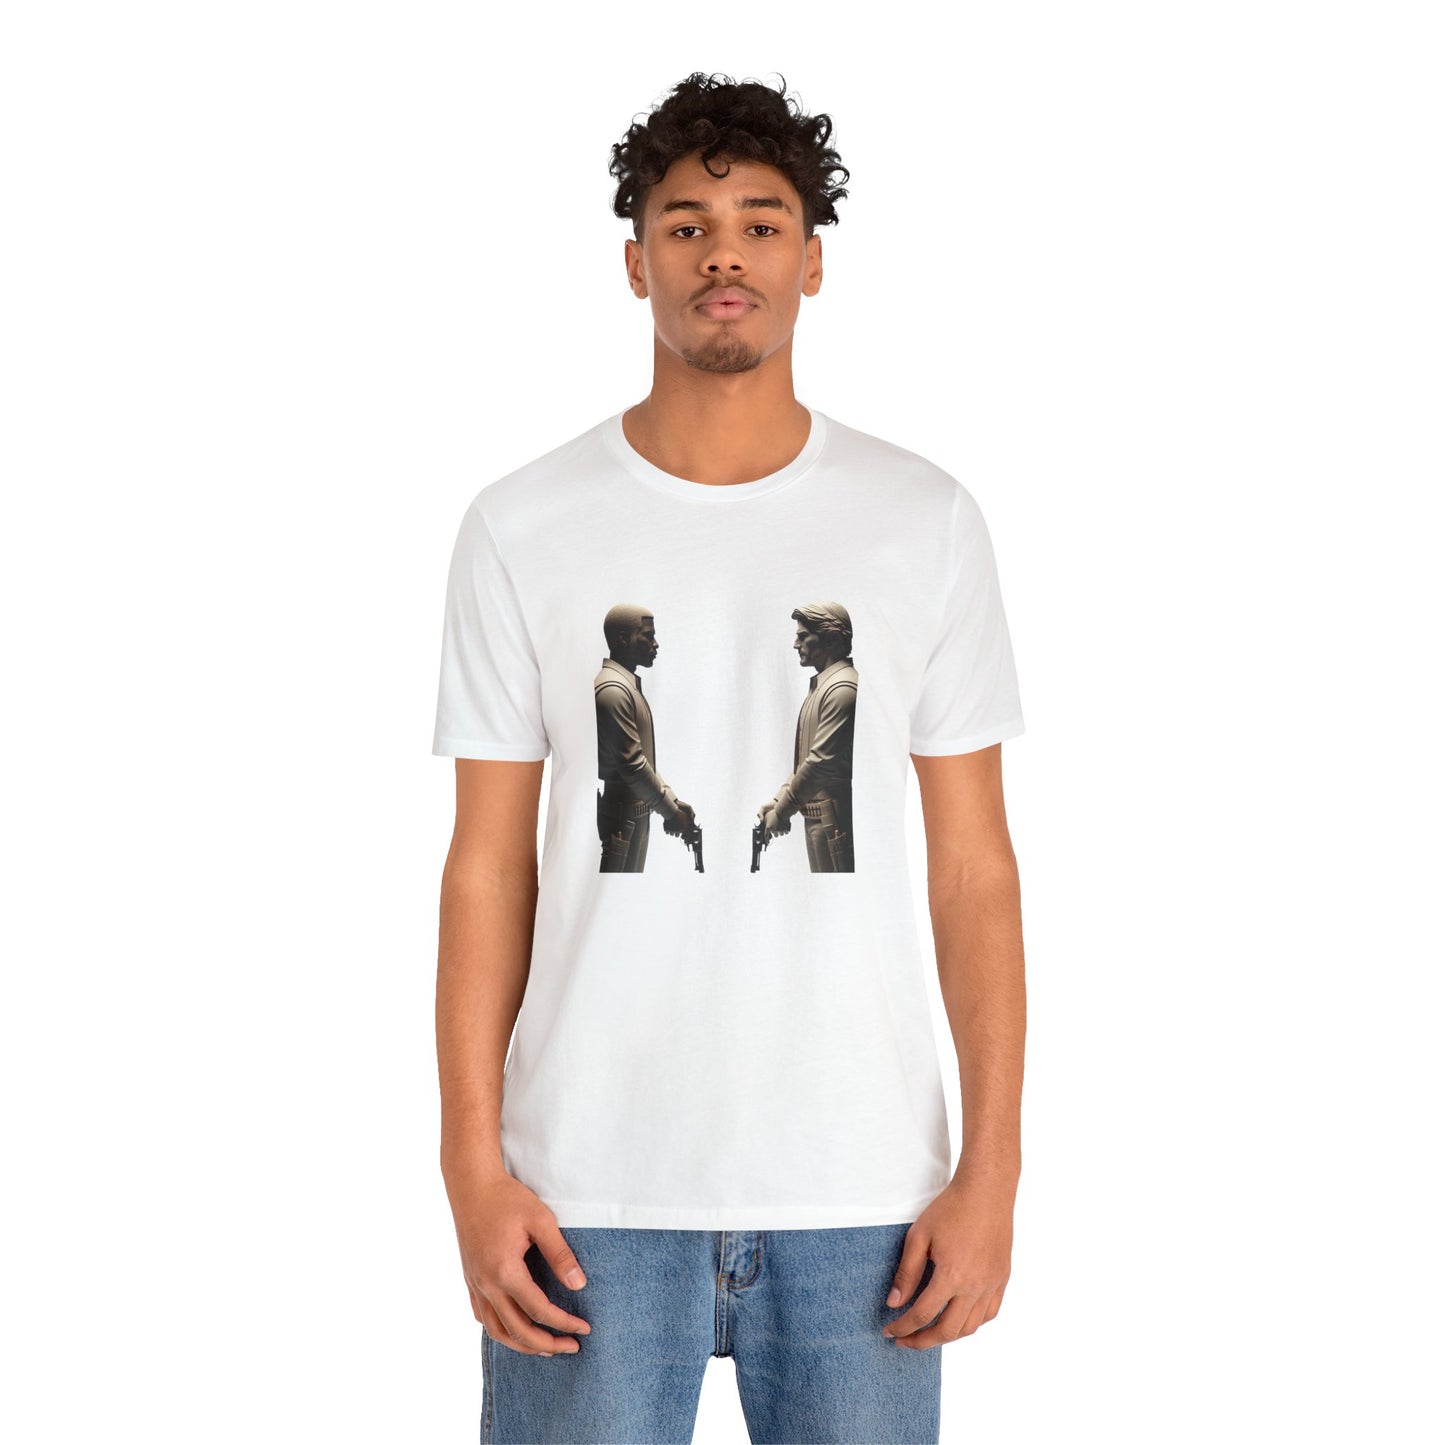 Duel Standoff Graphic Tee